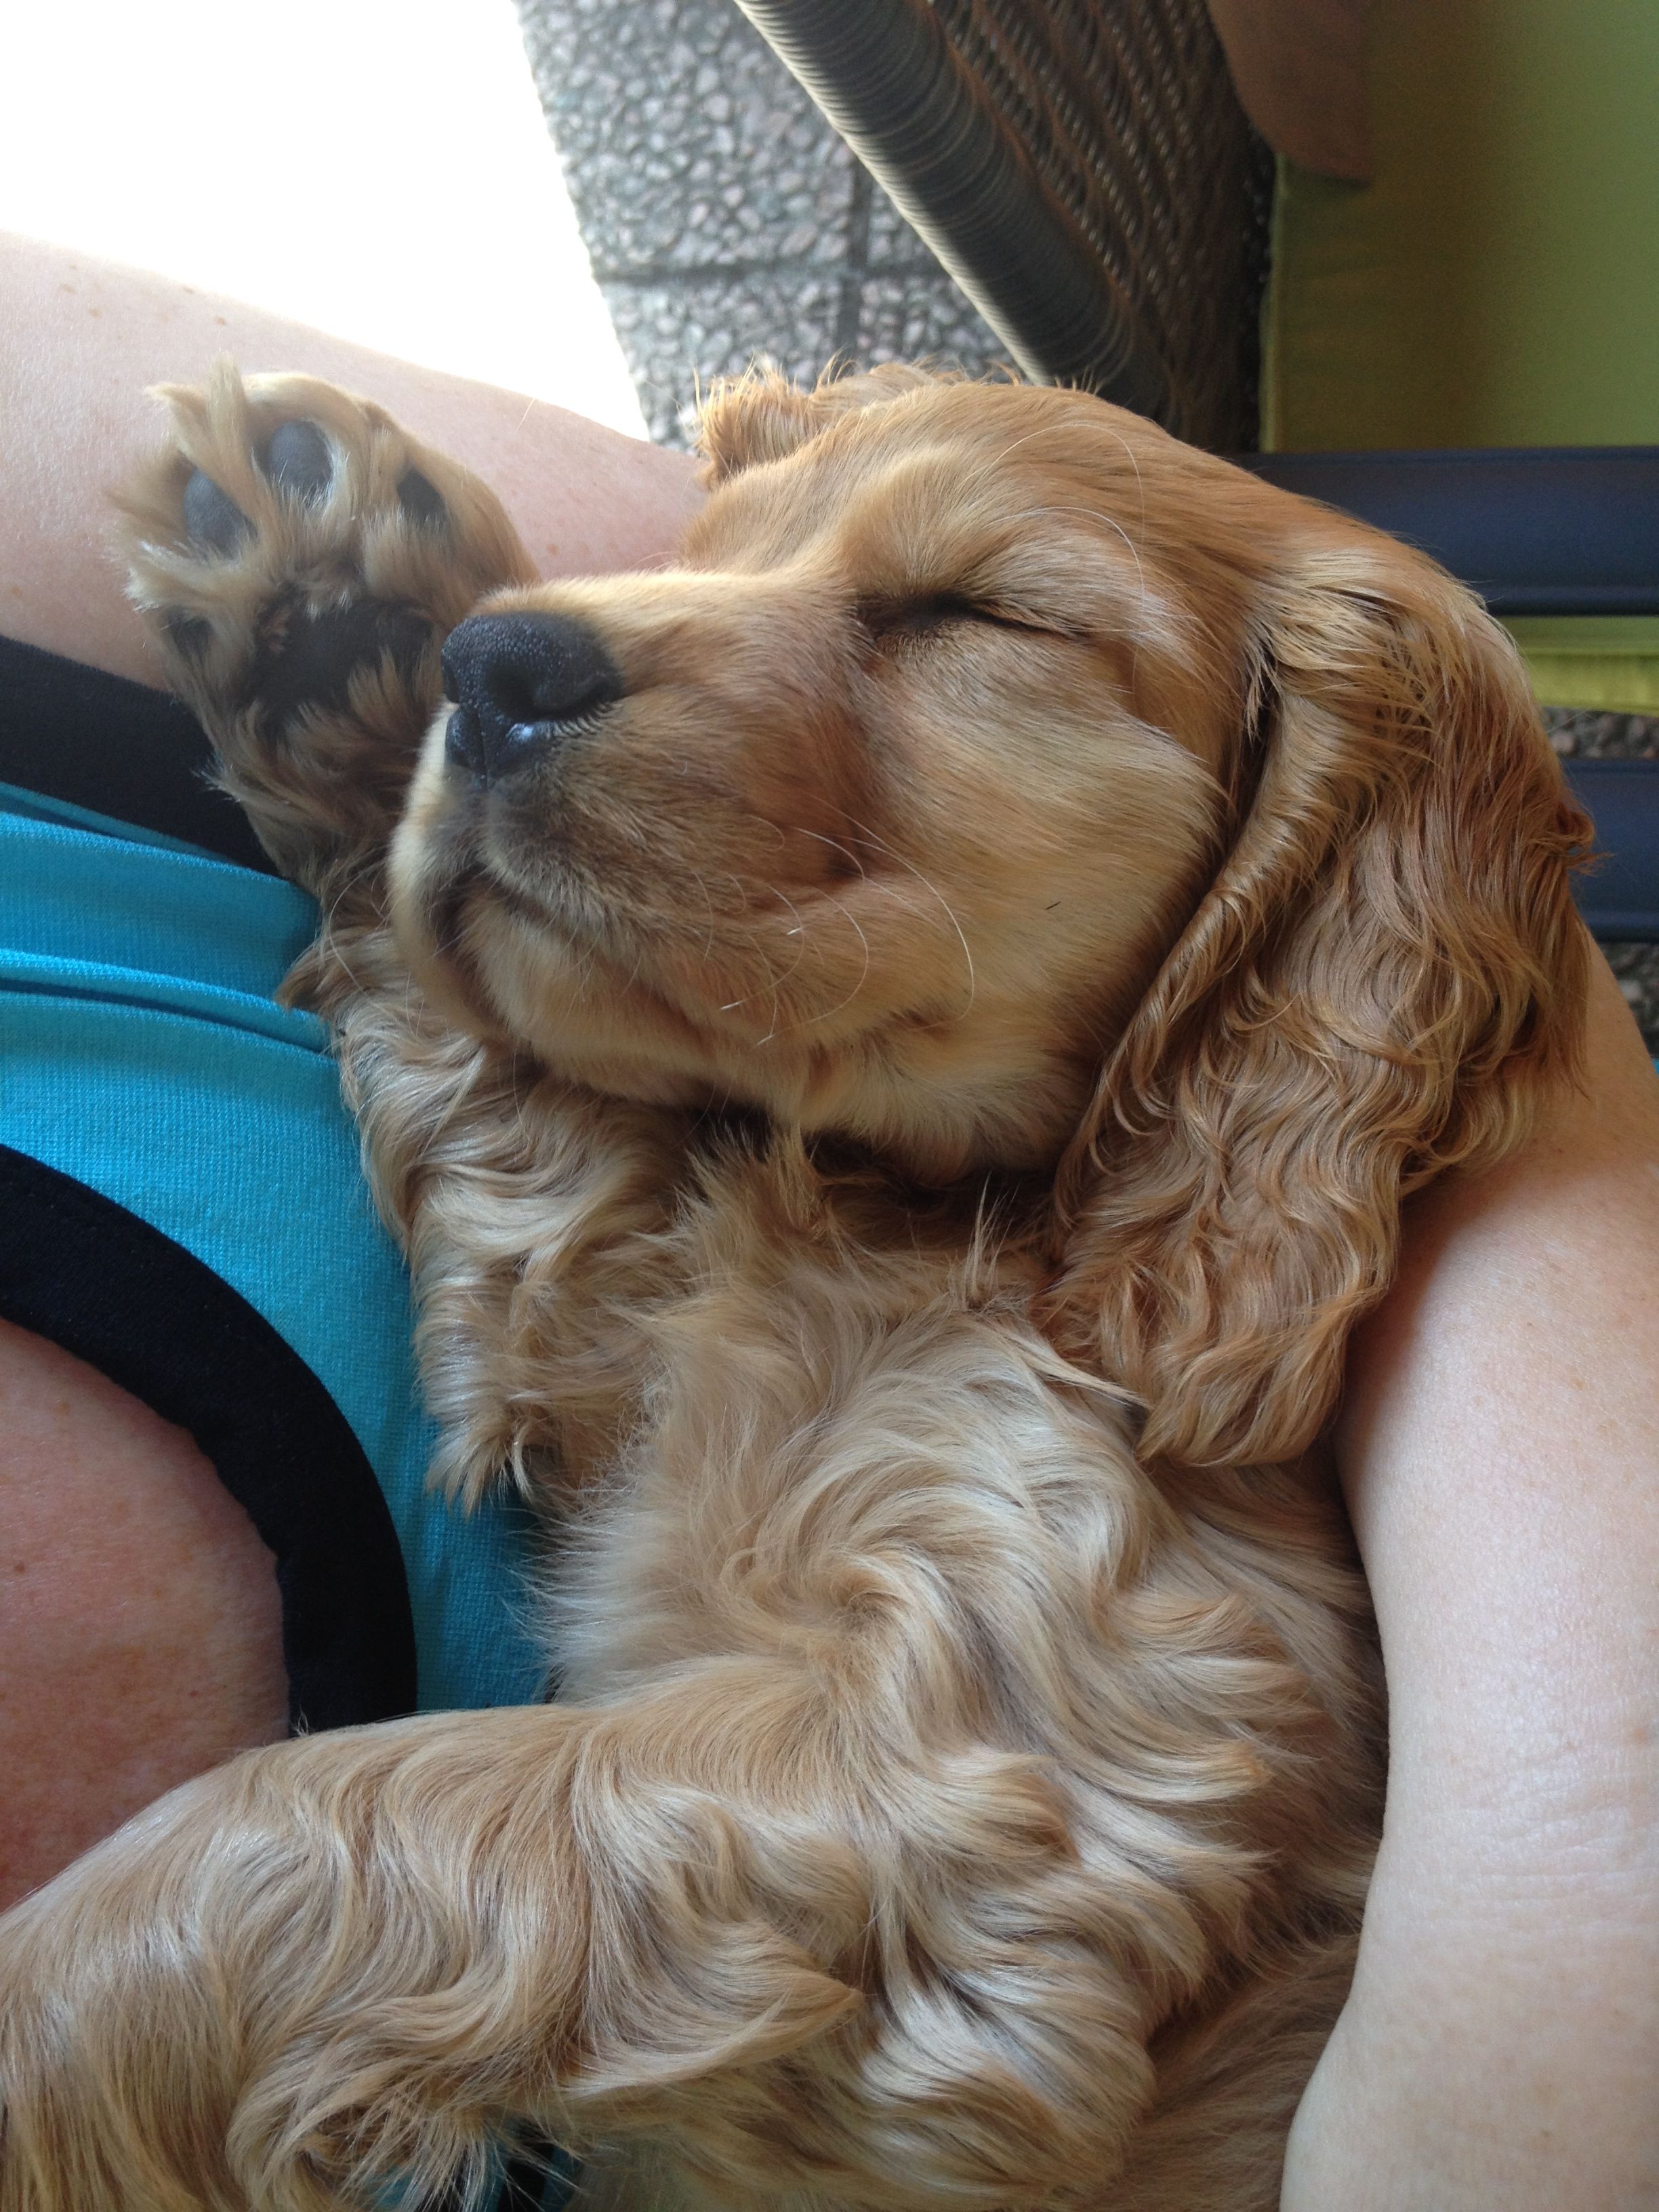 Cocker Spaniel puppy sleeping in its owner's arms